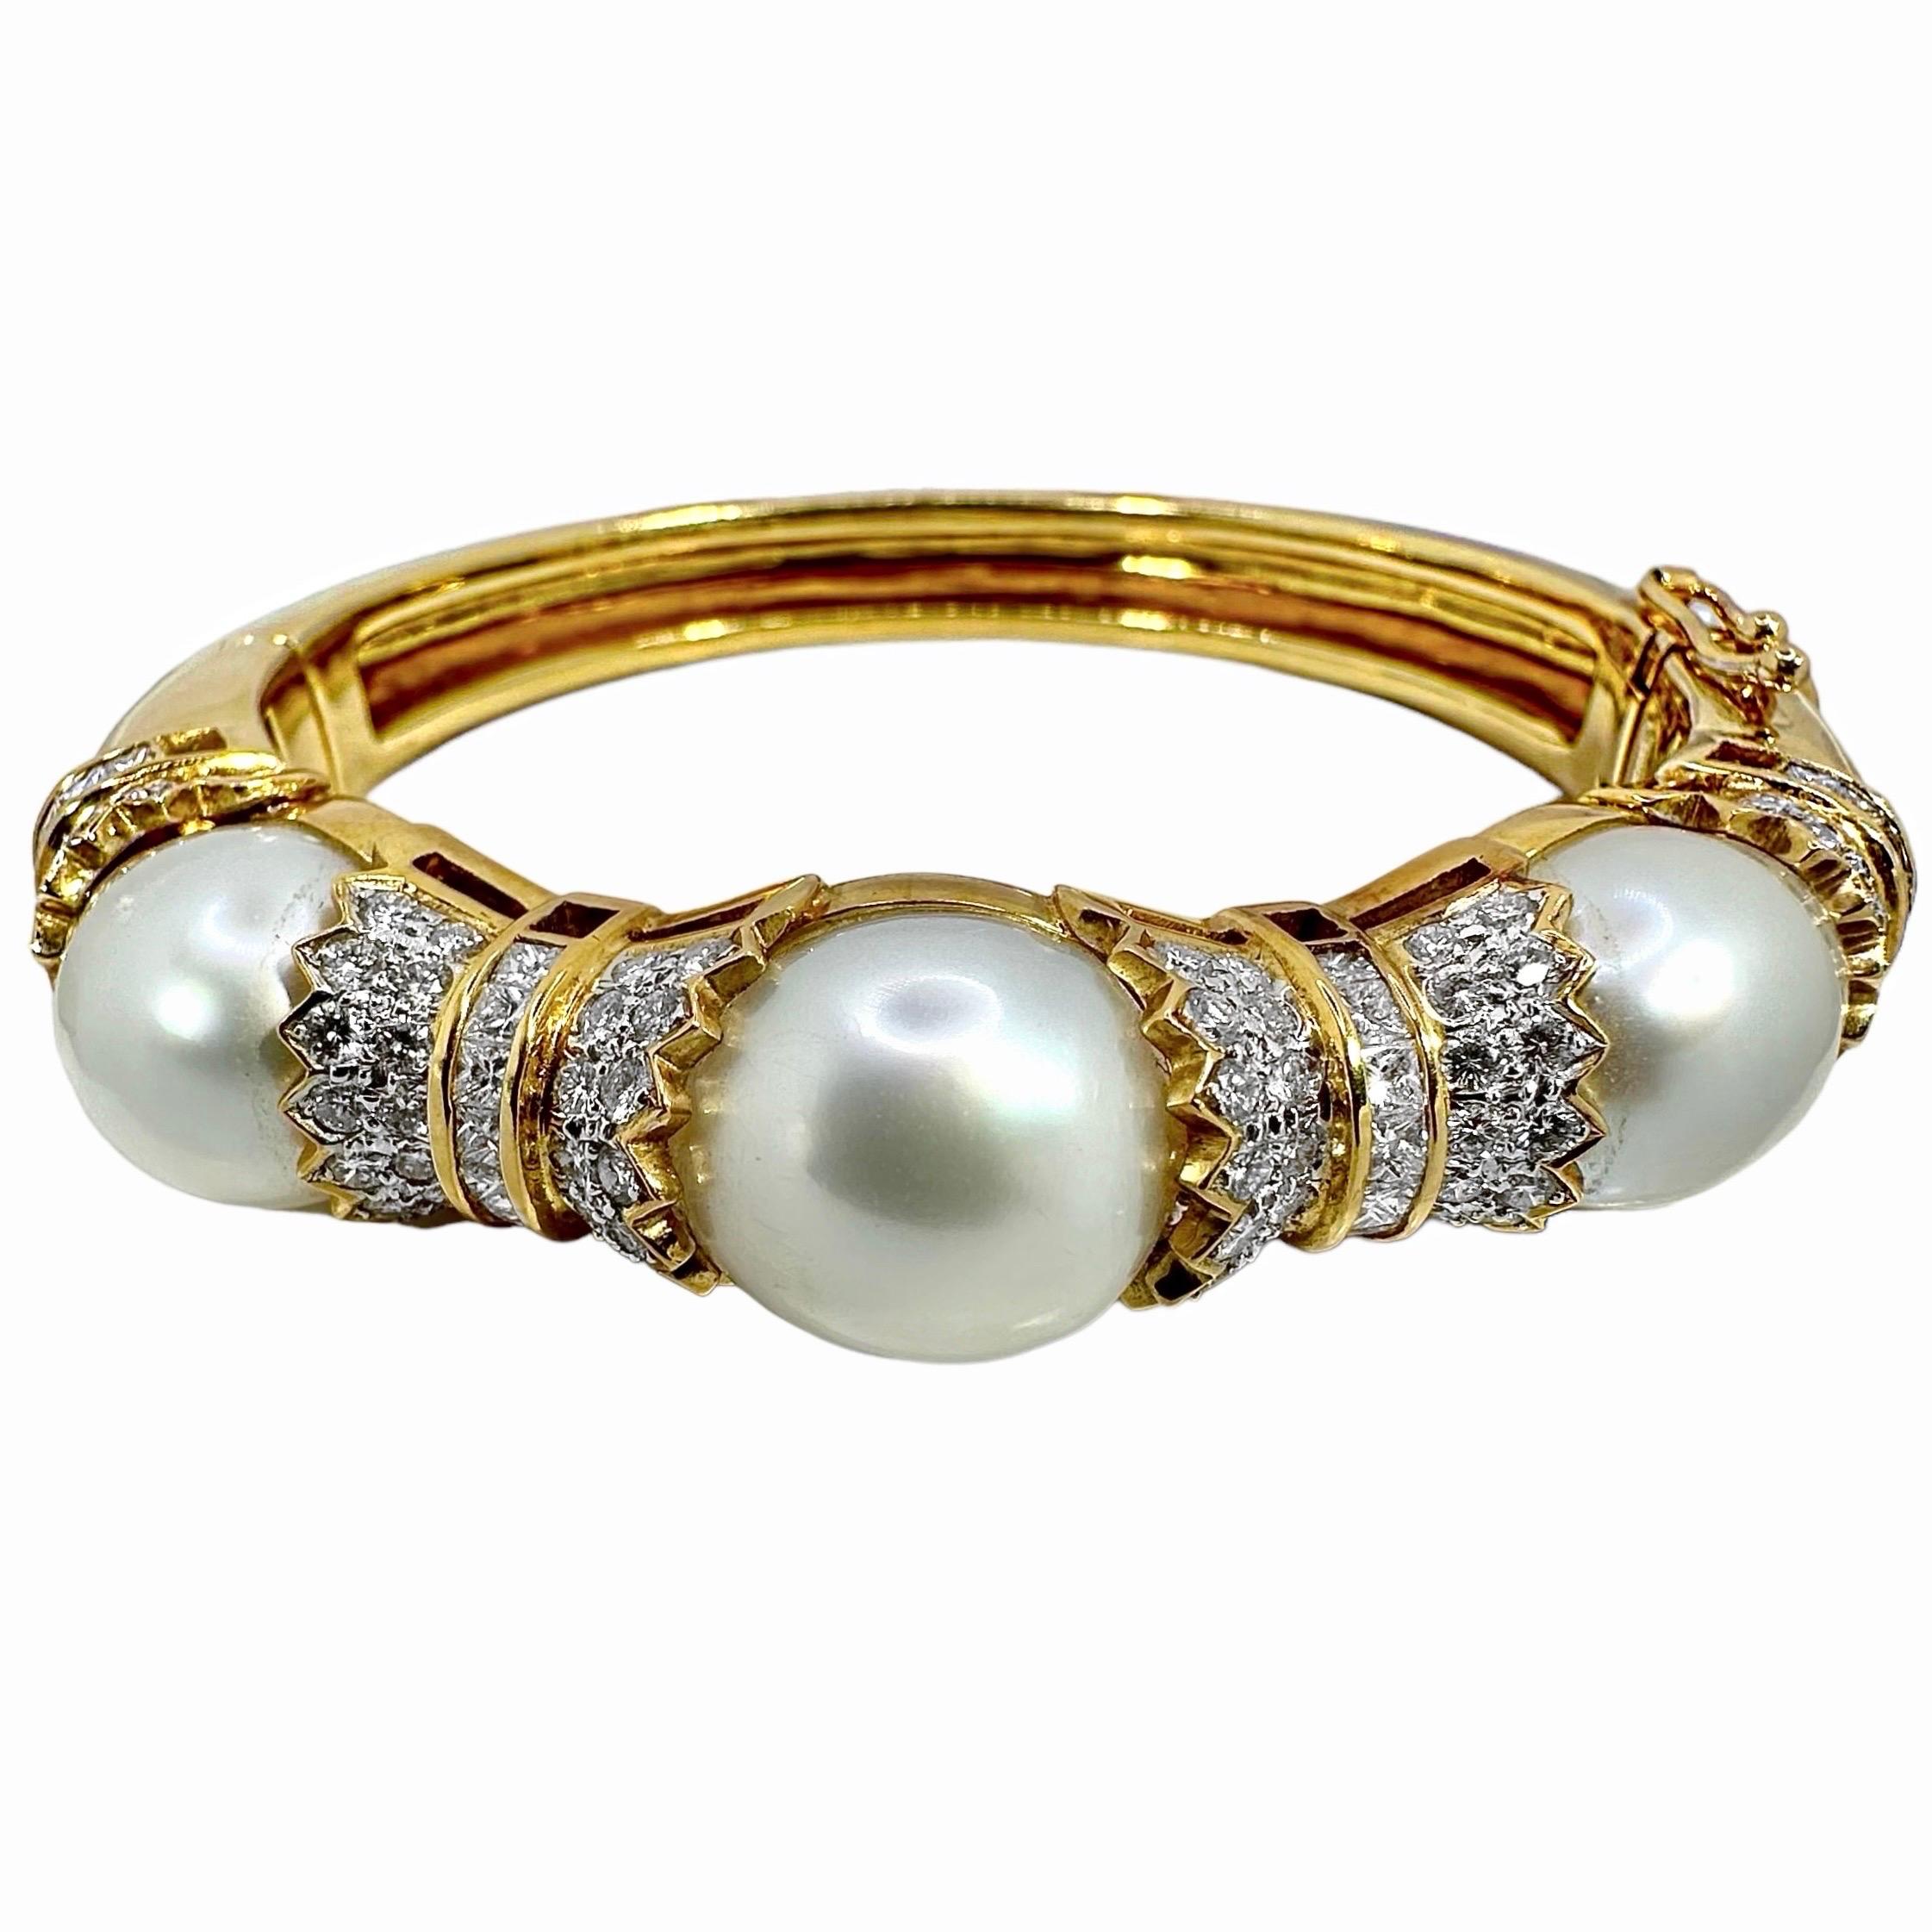 A strong yet wearable yellow gold bracelet centered around three cultured South Sea pearls. Each pearl nests between 2 end caps, which have been set with round brilliant cut diamonds. The end caps are separated by a row of channel set princess cut